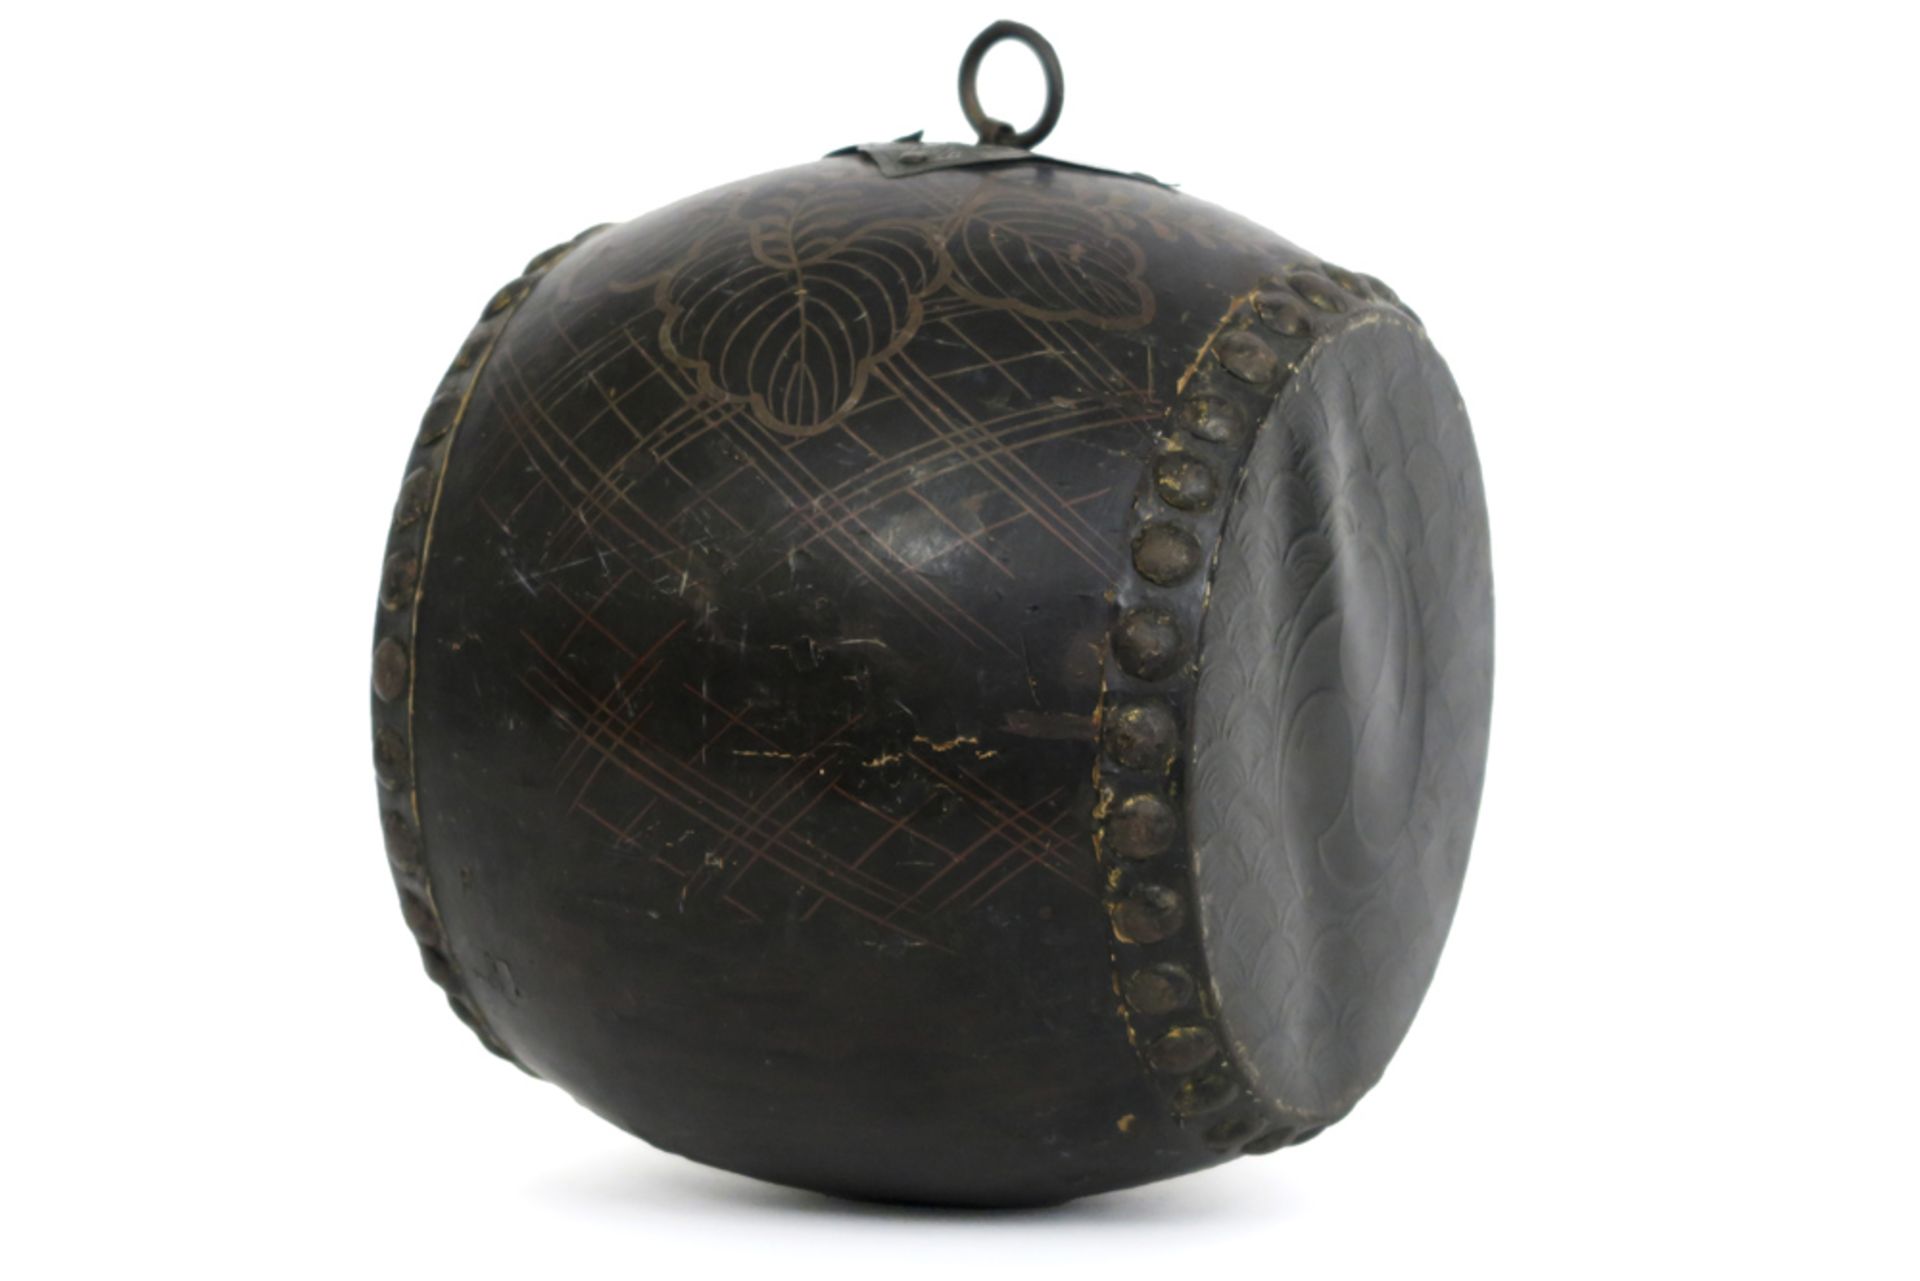 19th Cent. Japanese Meiji period hand drum in wood and leather || JAPAN - MEIJI-PERIODE - 19°